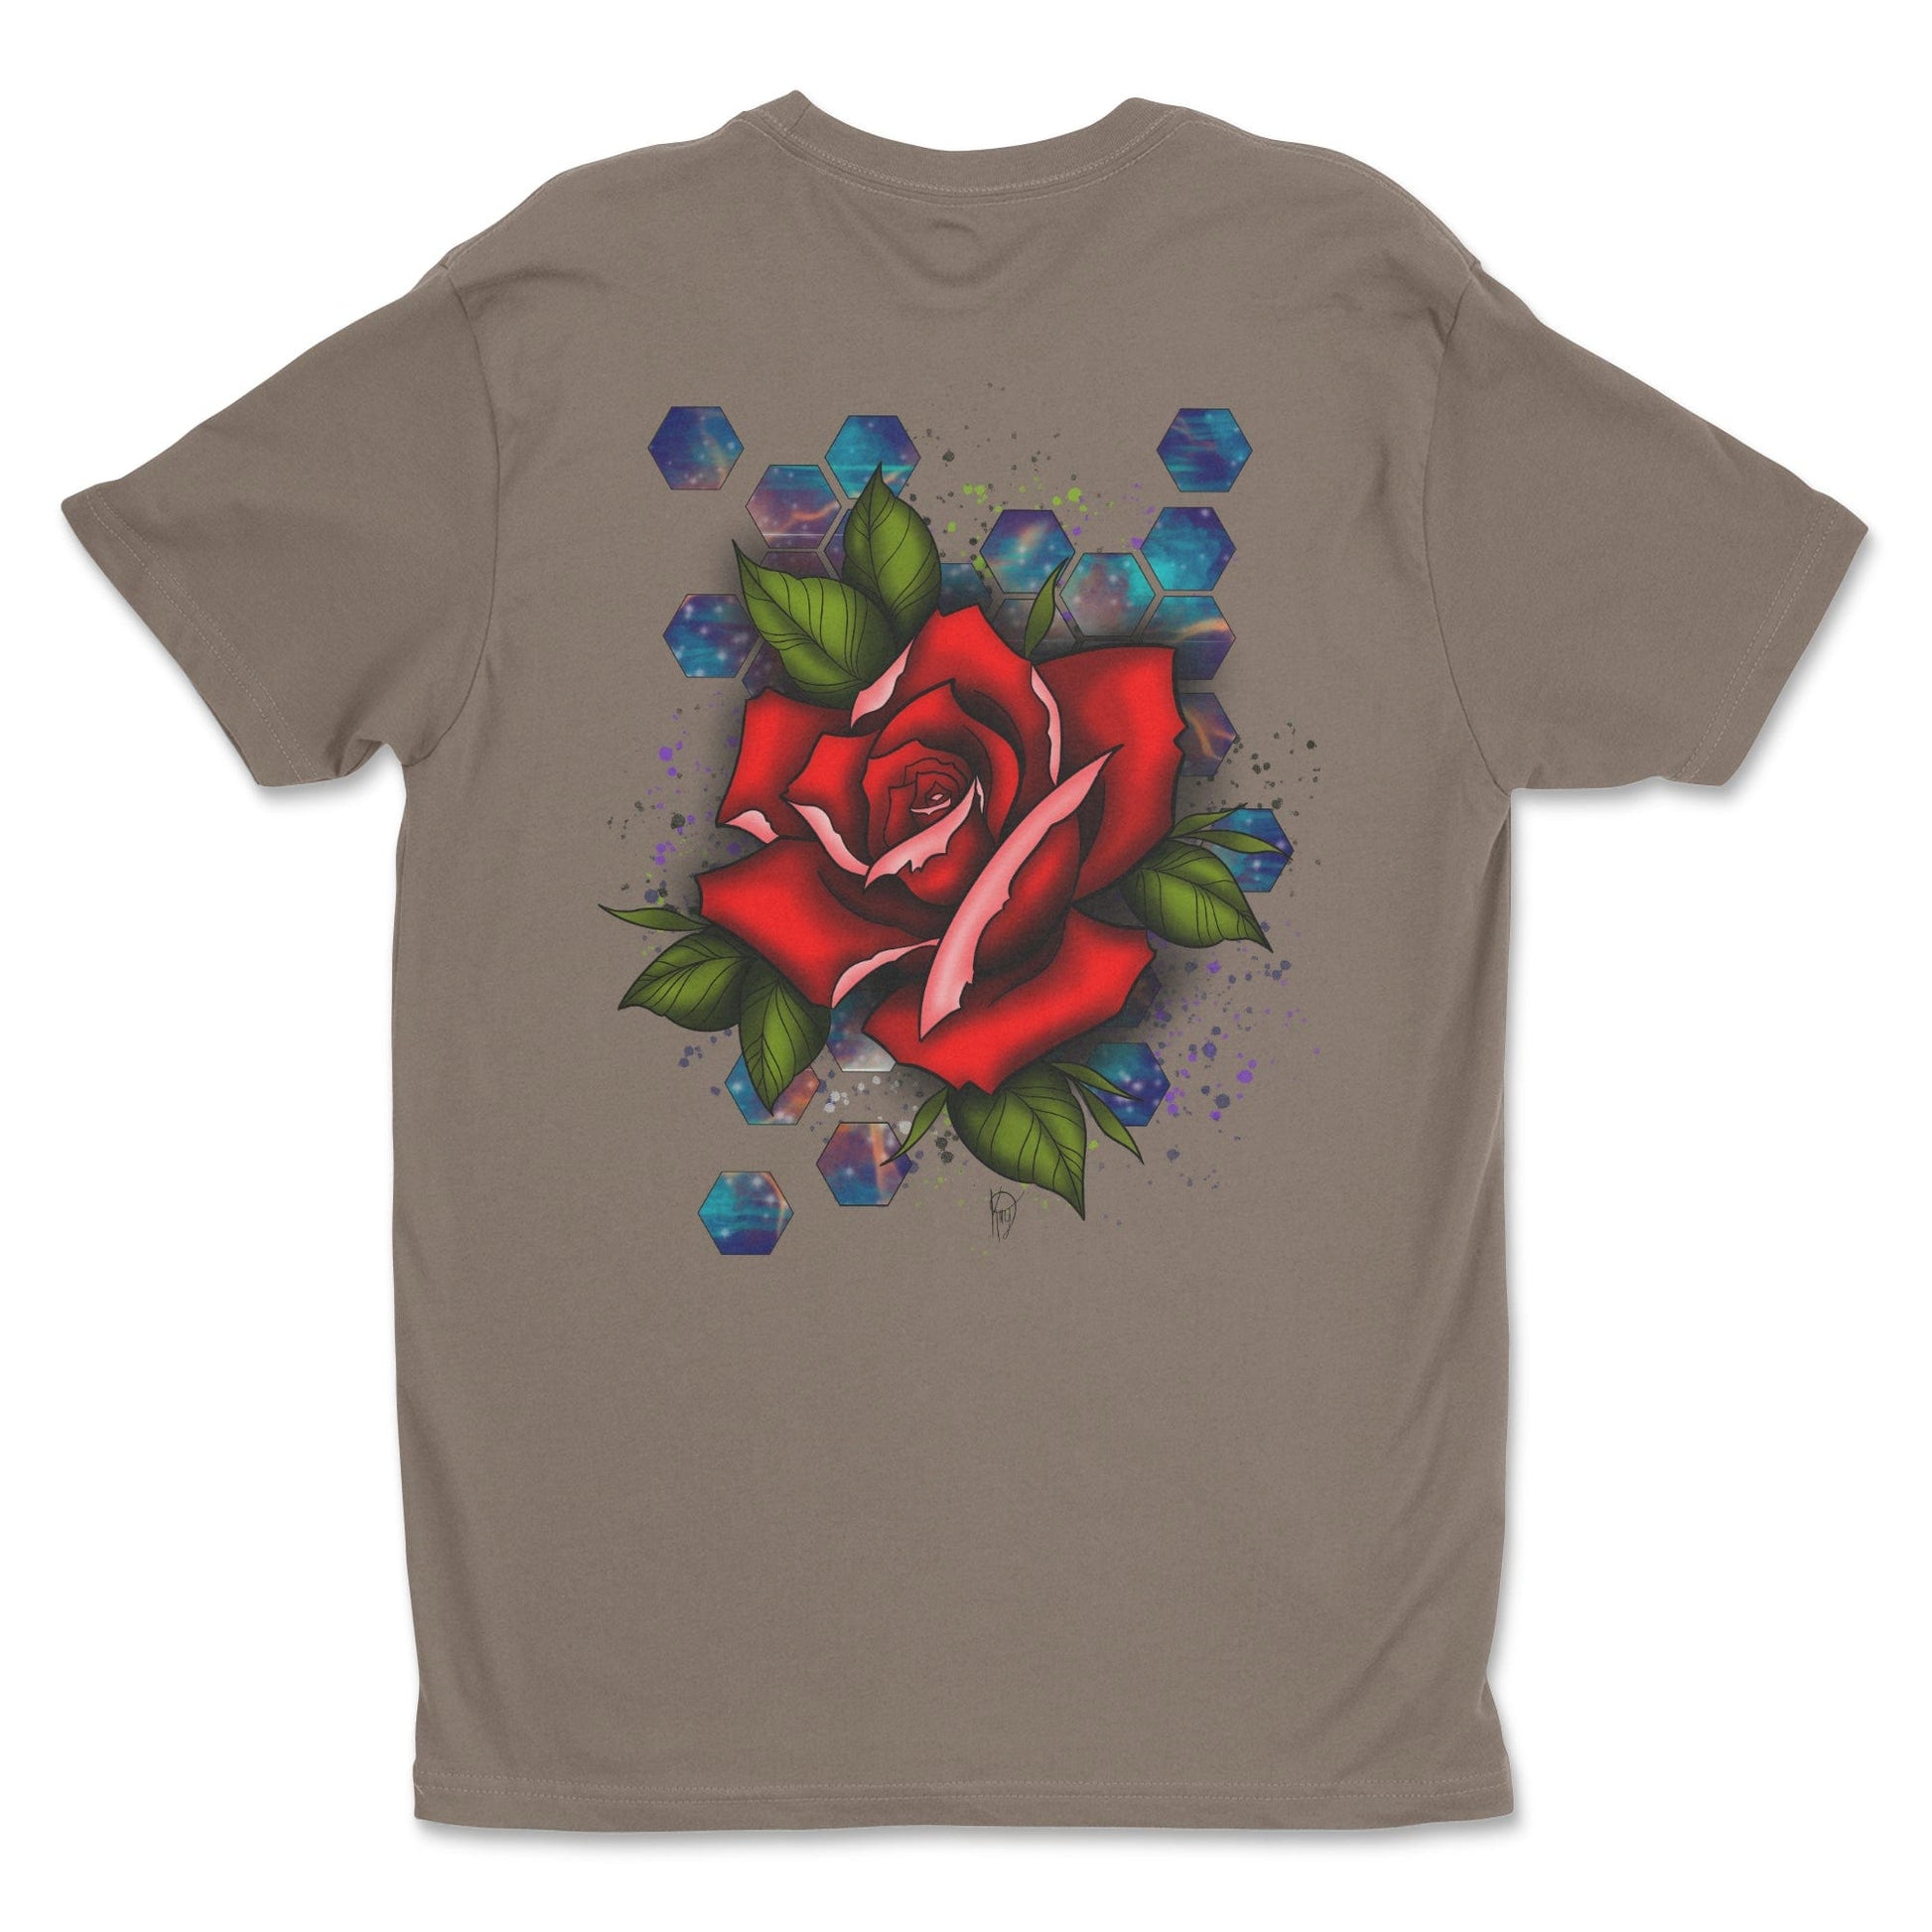 Legendary ltd. T SHIRT Rose and Stained Glass Tee by Kaylee